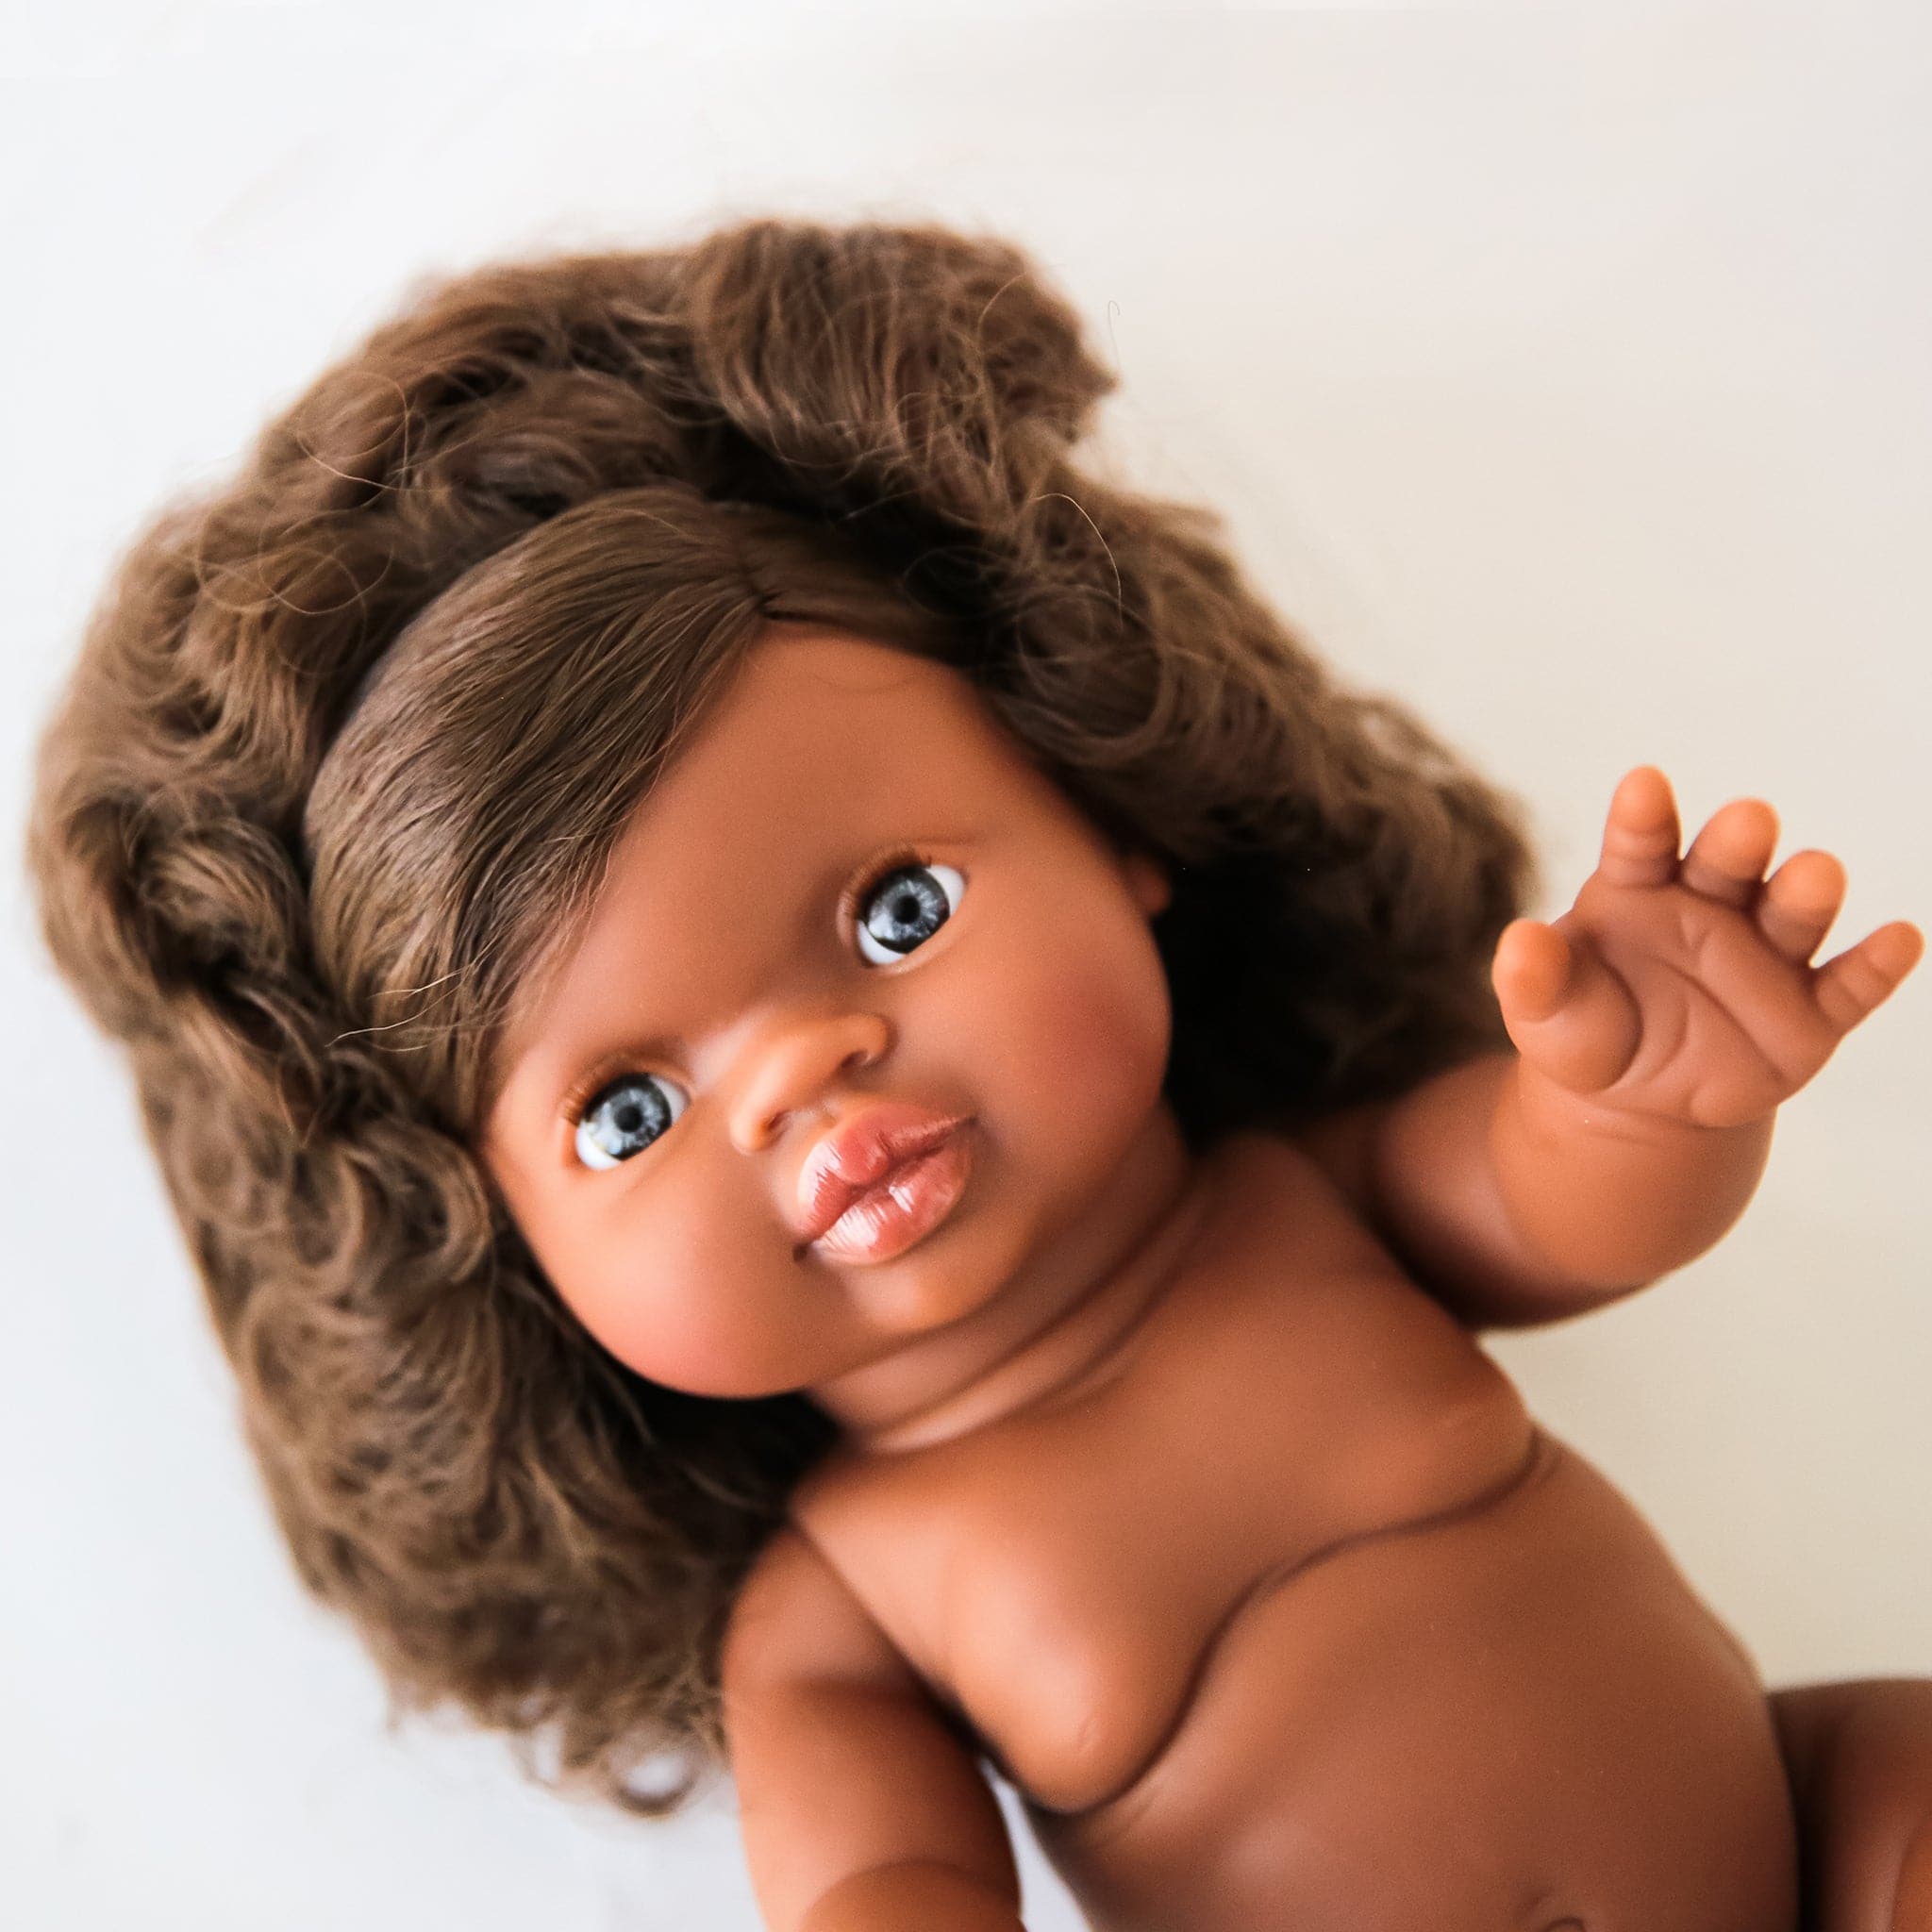 In front of a white background is a baby doll with dark brown curly hair.